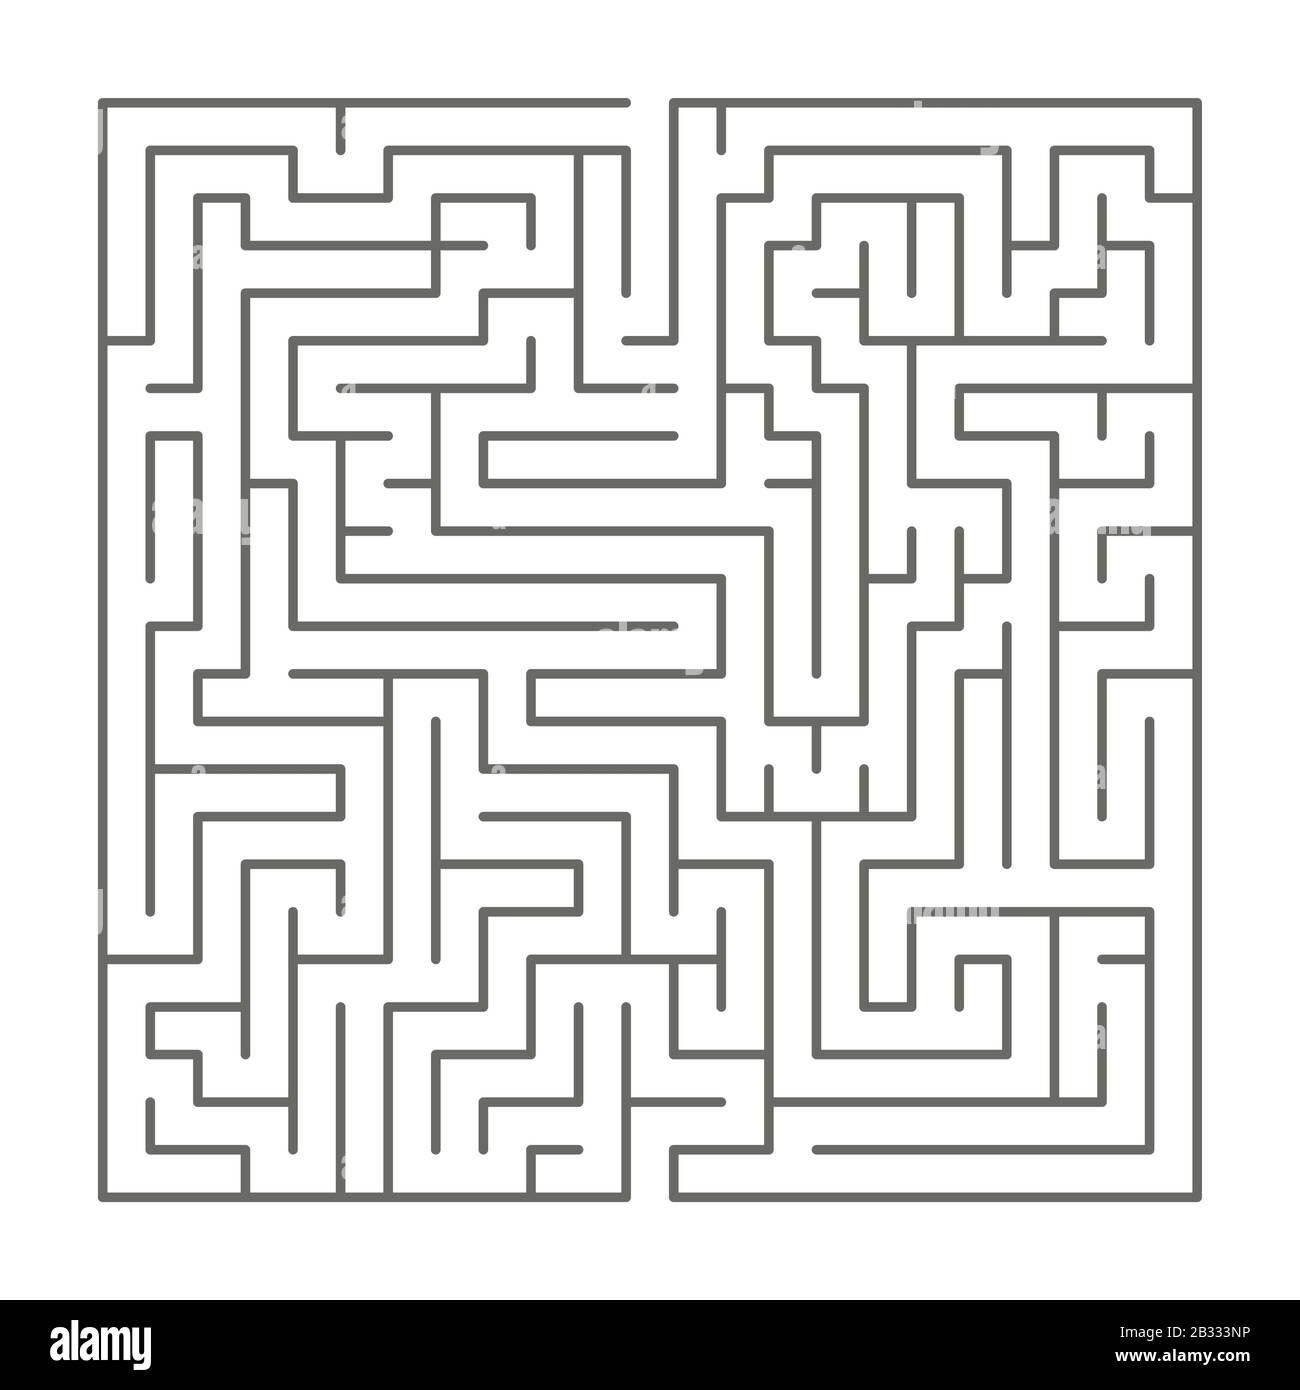 Square shaped complicated maze, black silhouette on white Stock Vector